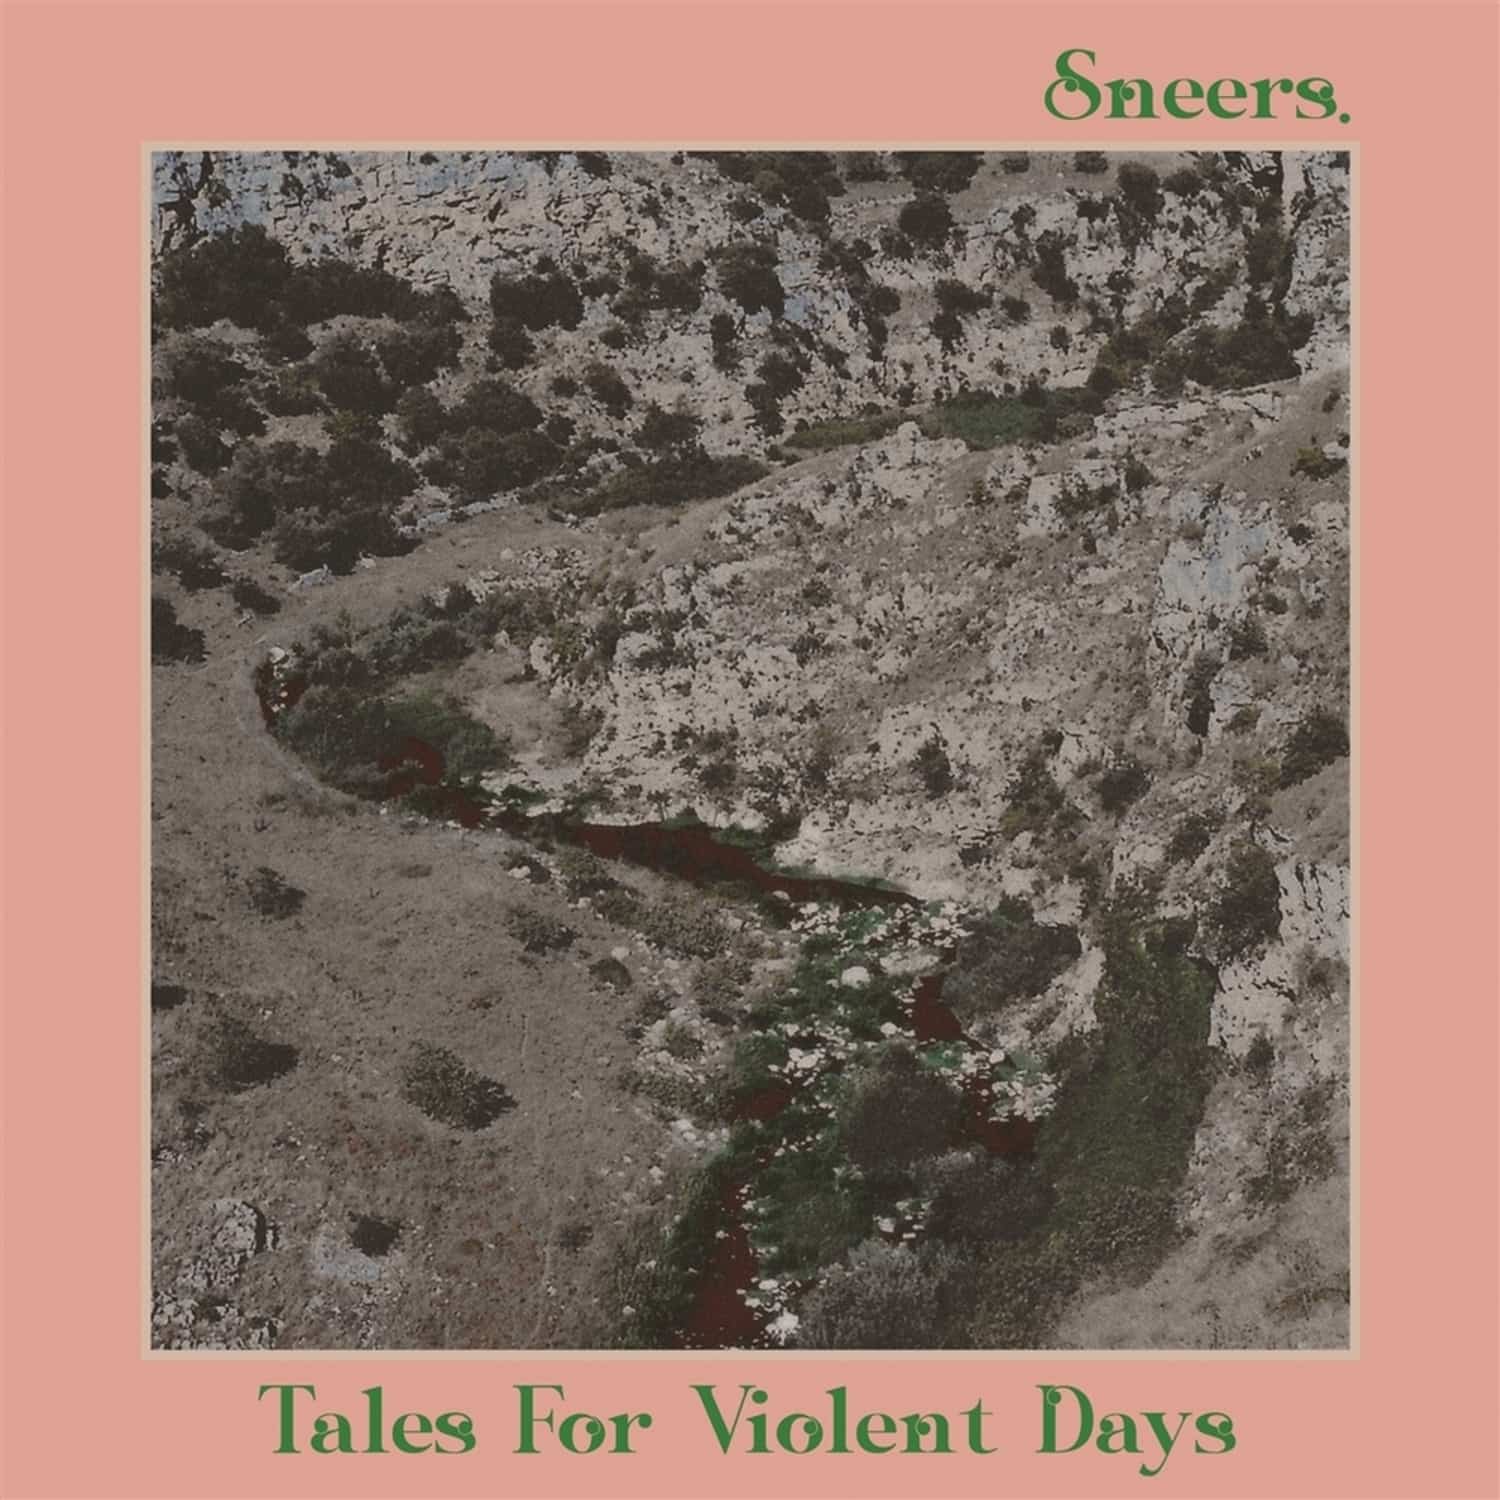 Sneers. - TALES FOR VIOLENT DAYS 